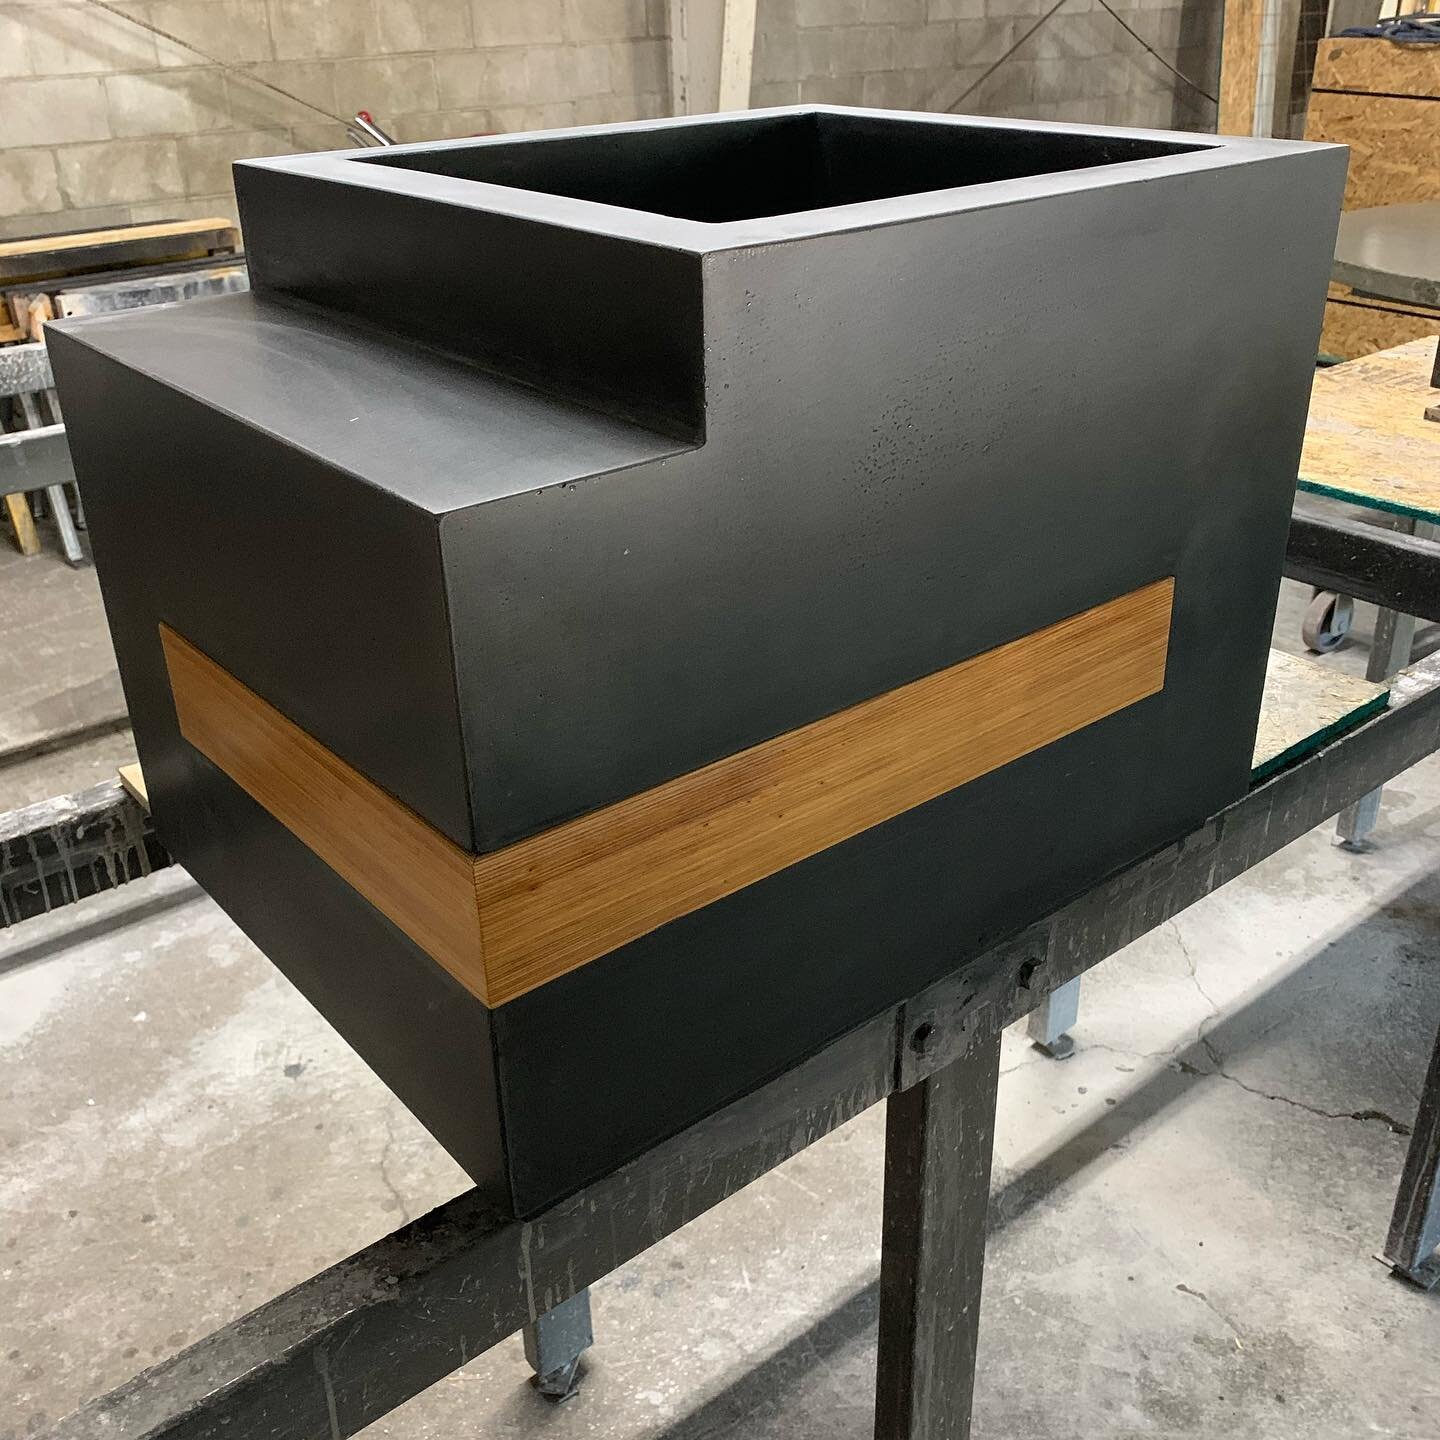 Sneak peek on a portion of one of our current projects...#planterbench #bench #concretebench #custom #customconcrete #concreteandwood #customconcretedesign #concretedesign #stogsconcretedesign #outdoorfurniture #concretefurniture #shipsnationwide